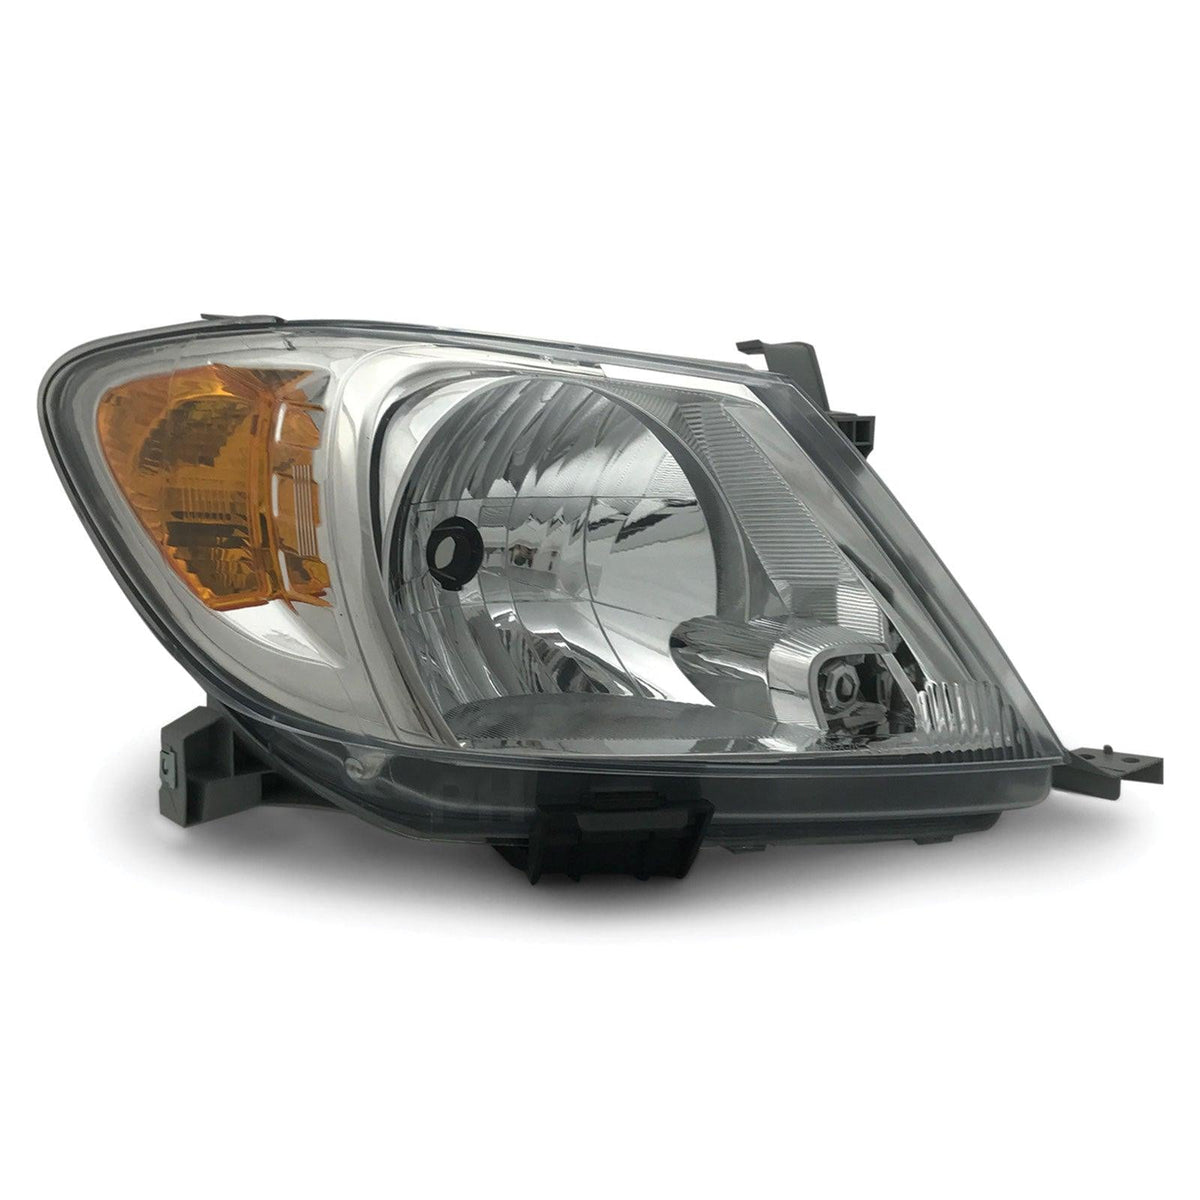 Panel House - Headlight RIGHT Amber Fits Toyota Hilux SR SR5 Workmate GGN KUN TGN 05 - 08 - 4X4OC™ | 4x4 Offroad Centre